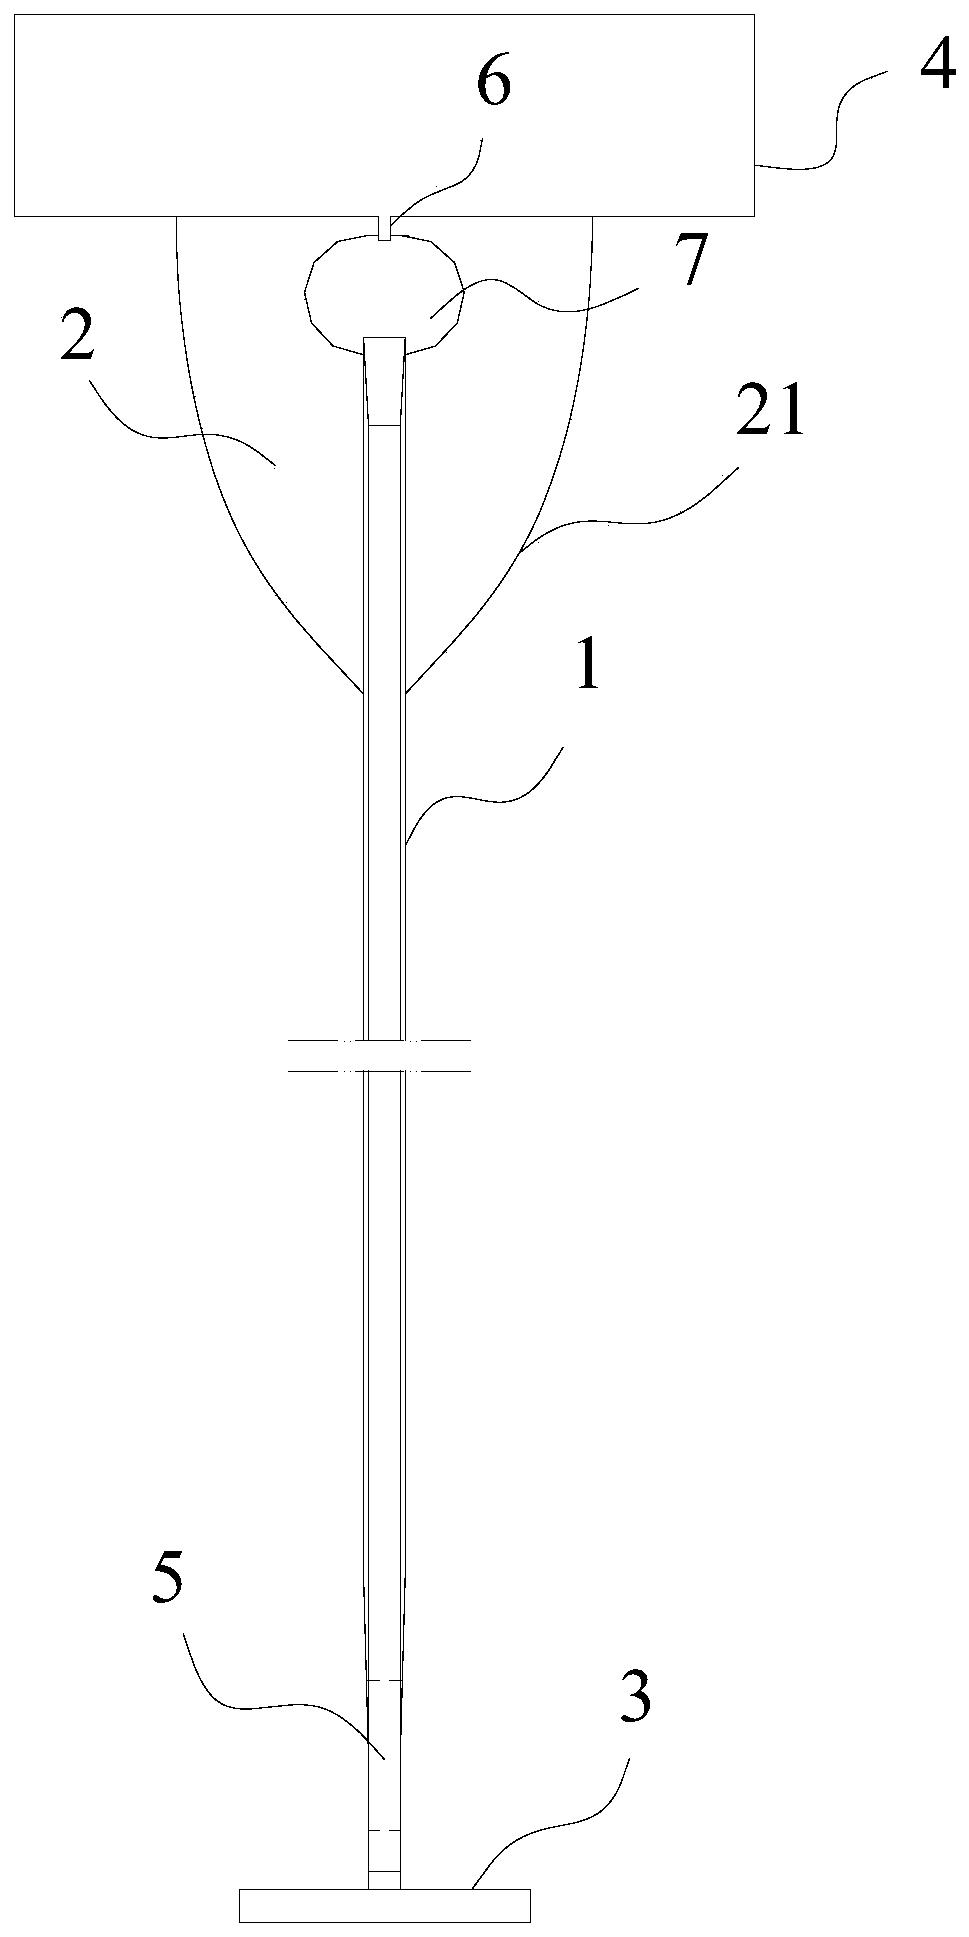 A solid web type rigid suspender and its installation method